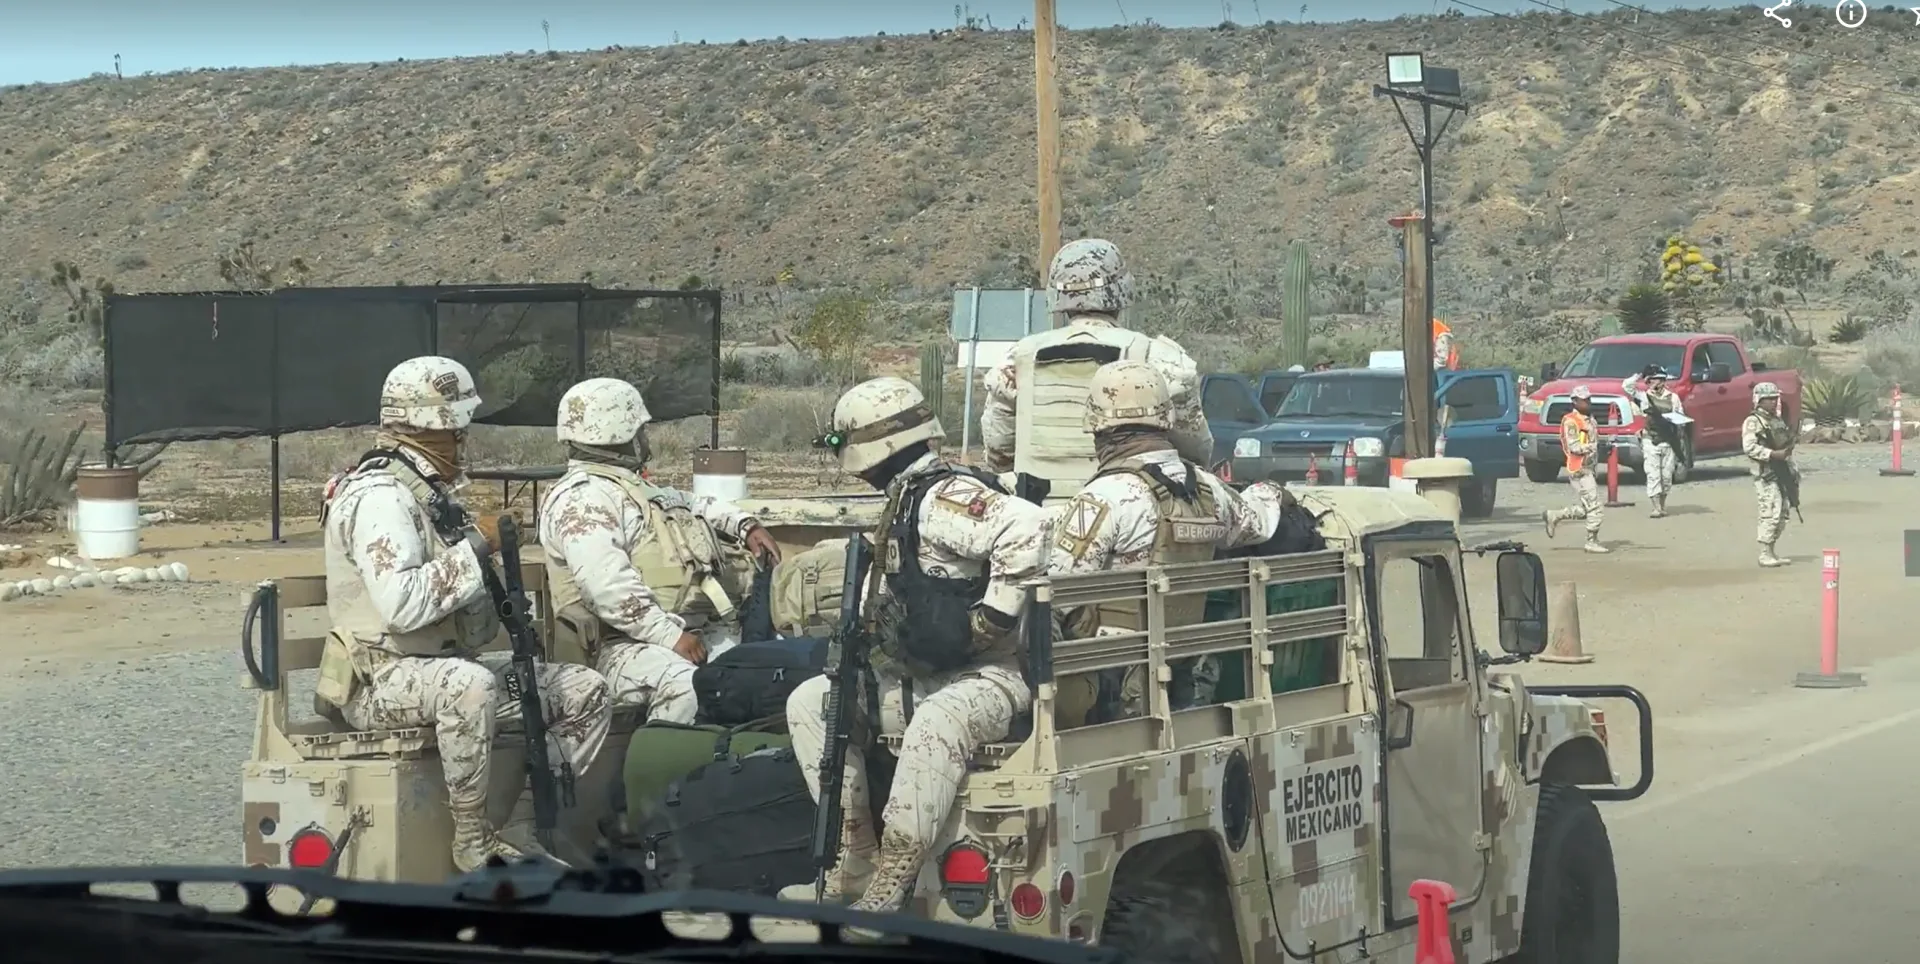 military checkpoints are common in mexico